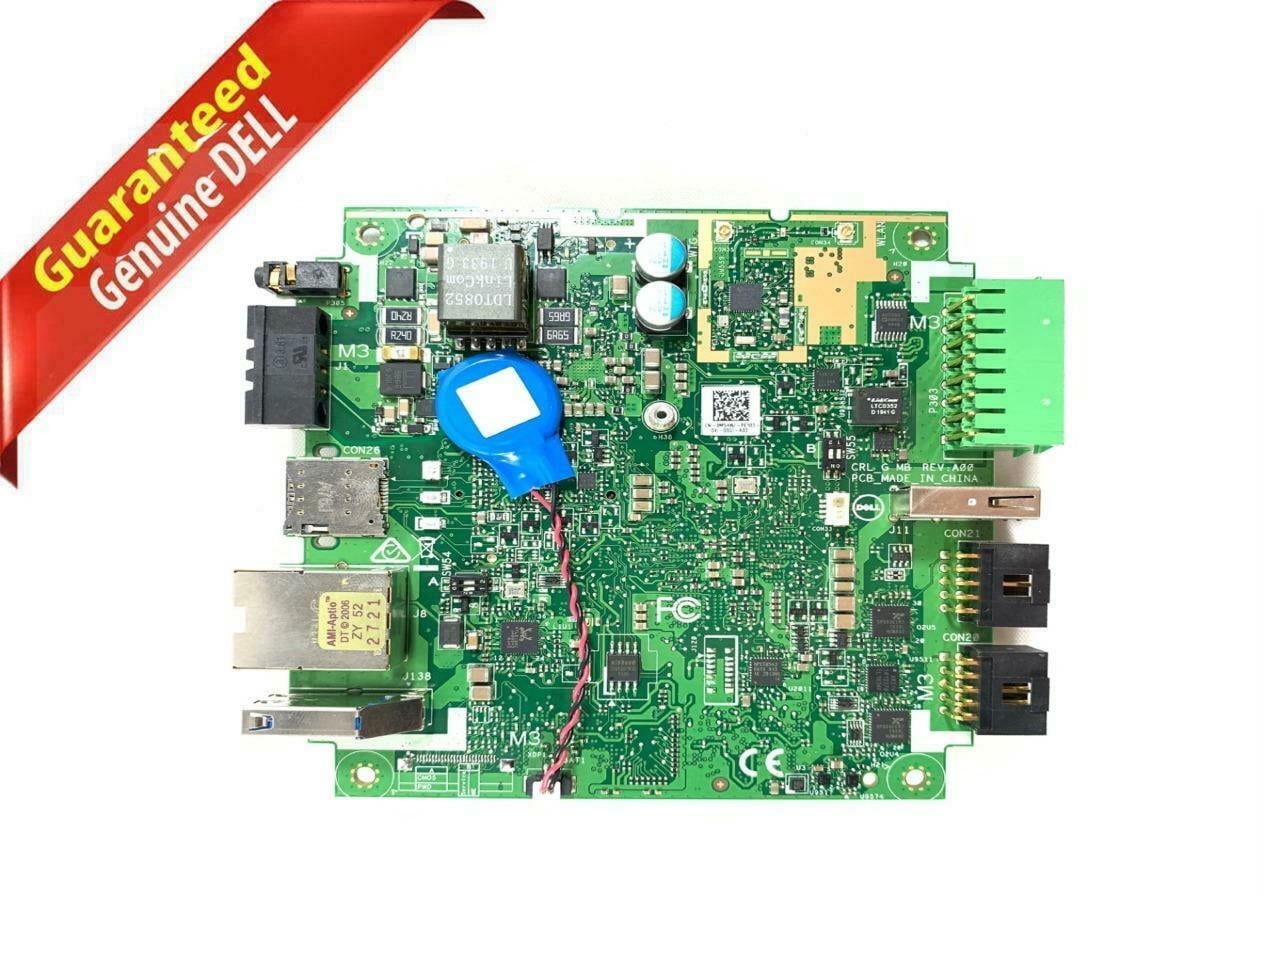 XP35R Dell Inspiron M5040 Motherboard System Board with AMD E-450 1.65GHz XP35R